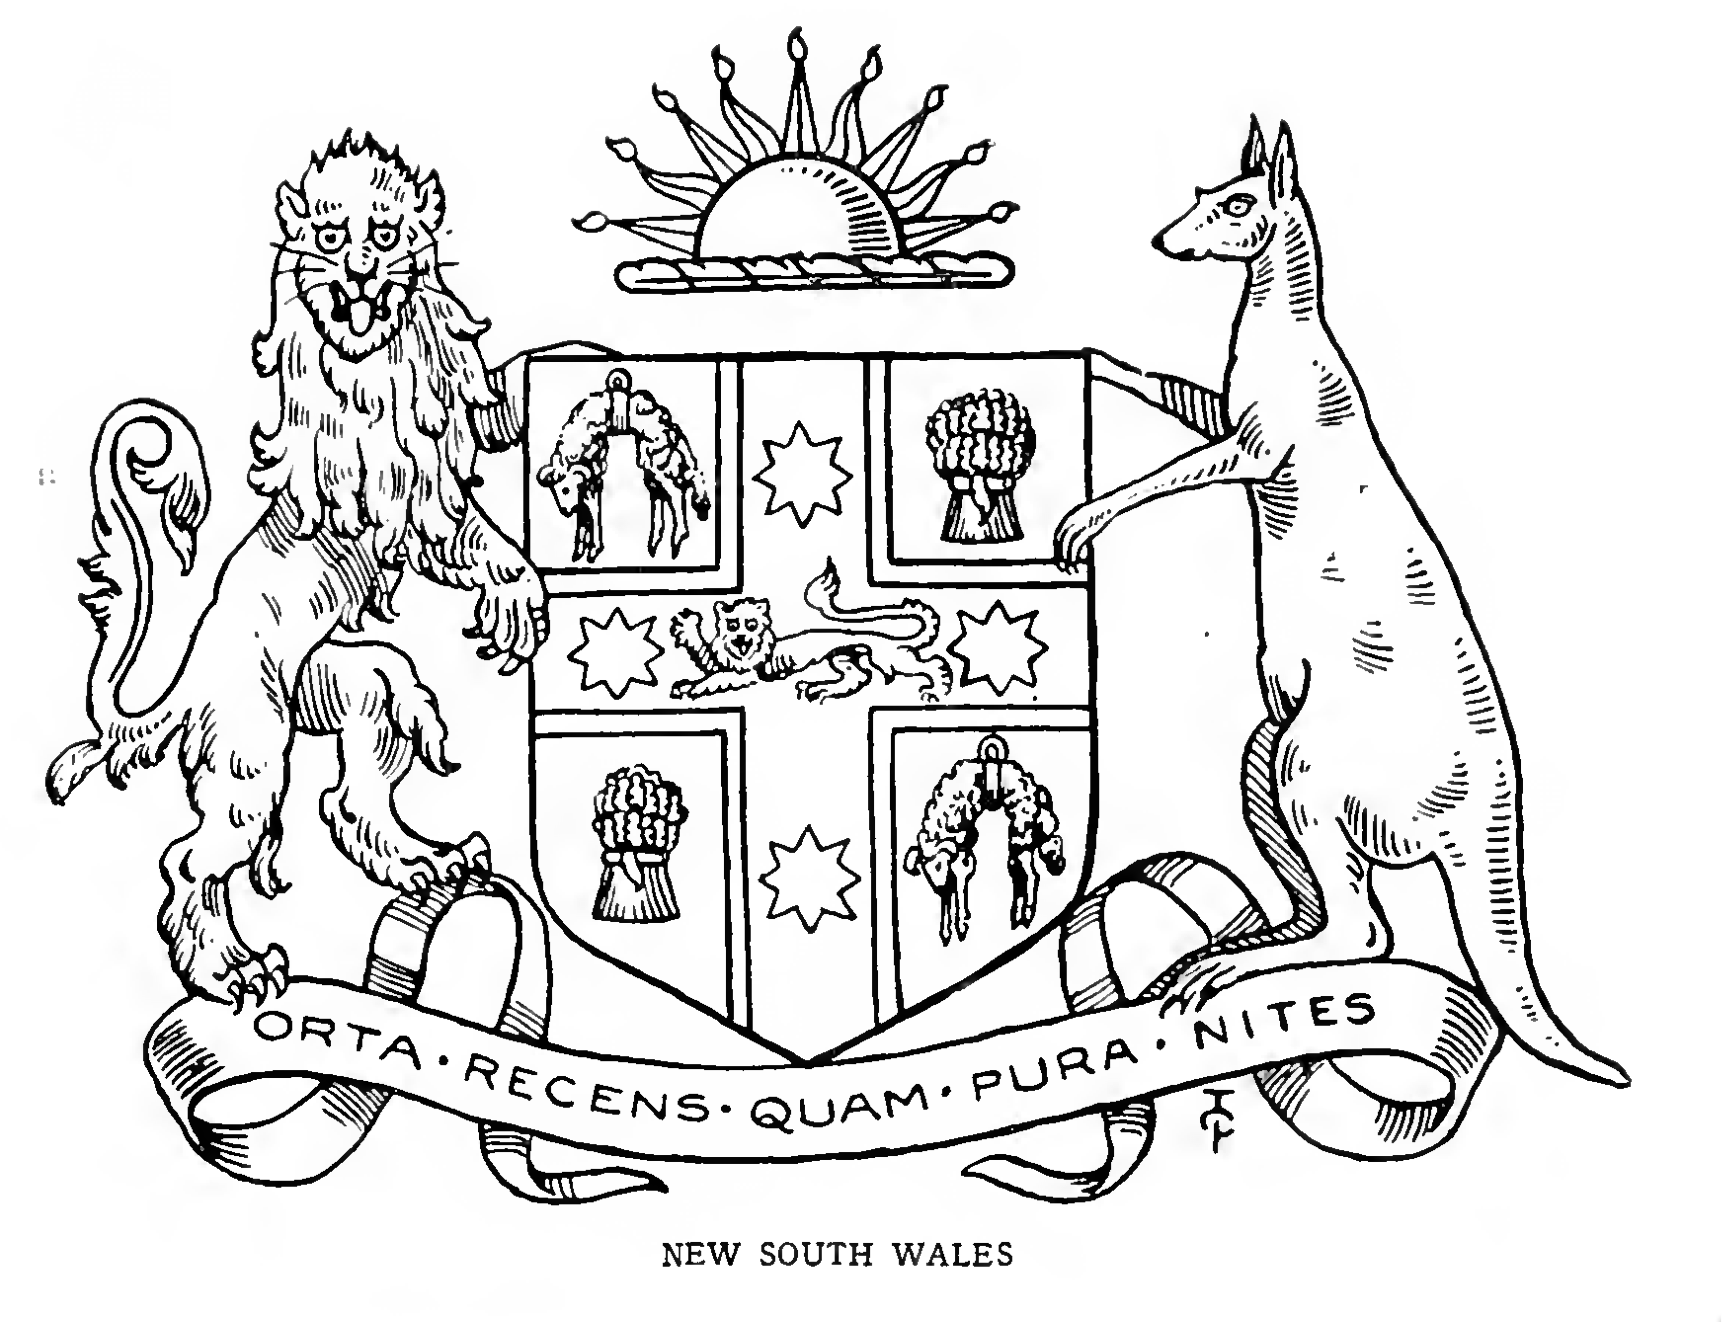 NEW SOUTH WALES (Commonwealth of Australia).